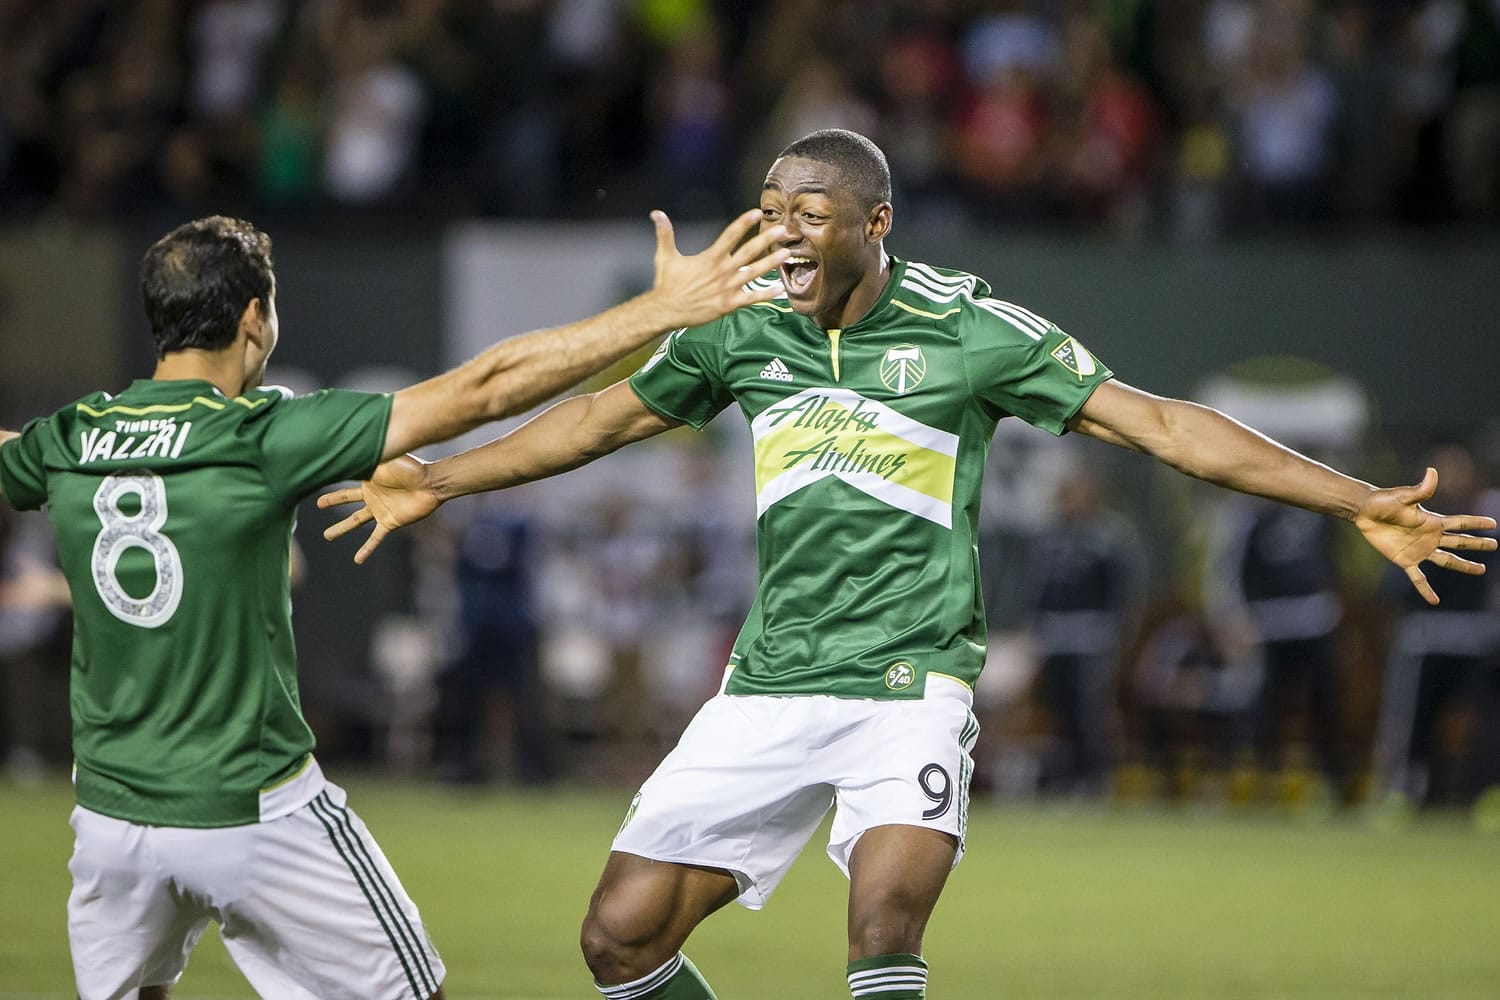 Timbers' forward Fanendo Adi, right, celebrates after scoring the first goal of the game with Diego Valeri, who assisted in the goal, during the second half at the Portland Timbers' match against the Chicago Fire on Friday Aug. 7, 2015, at Providence Park.